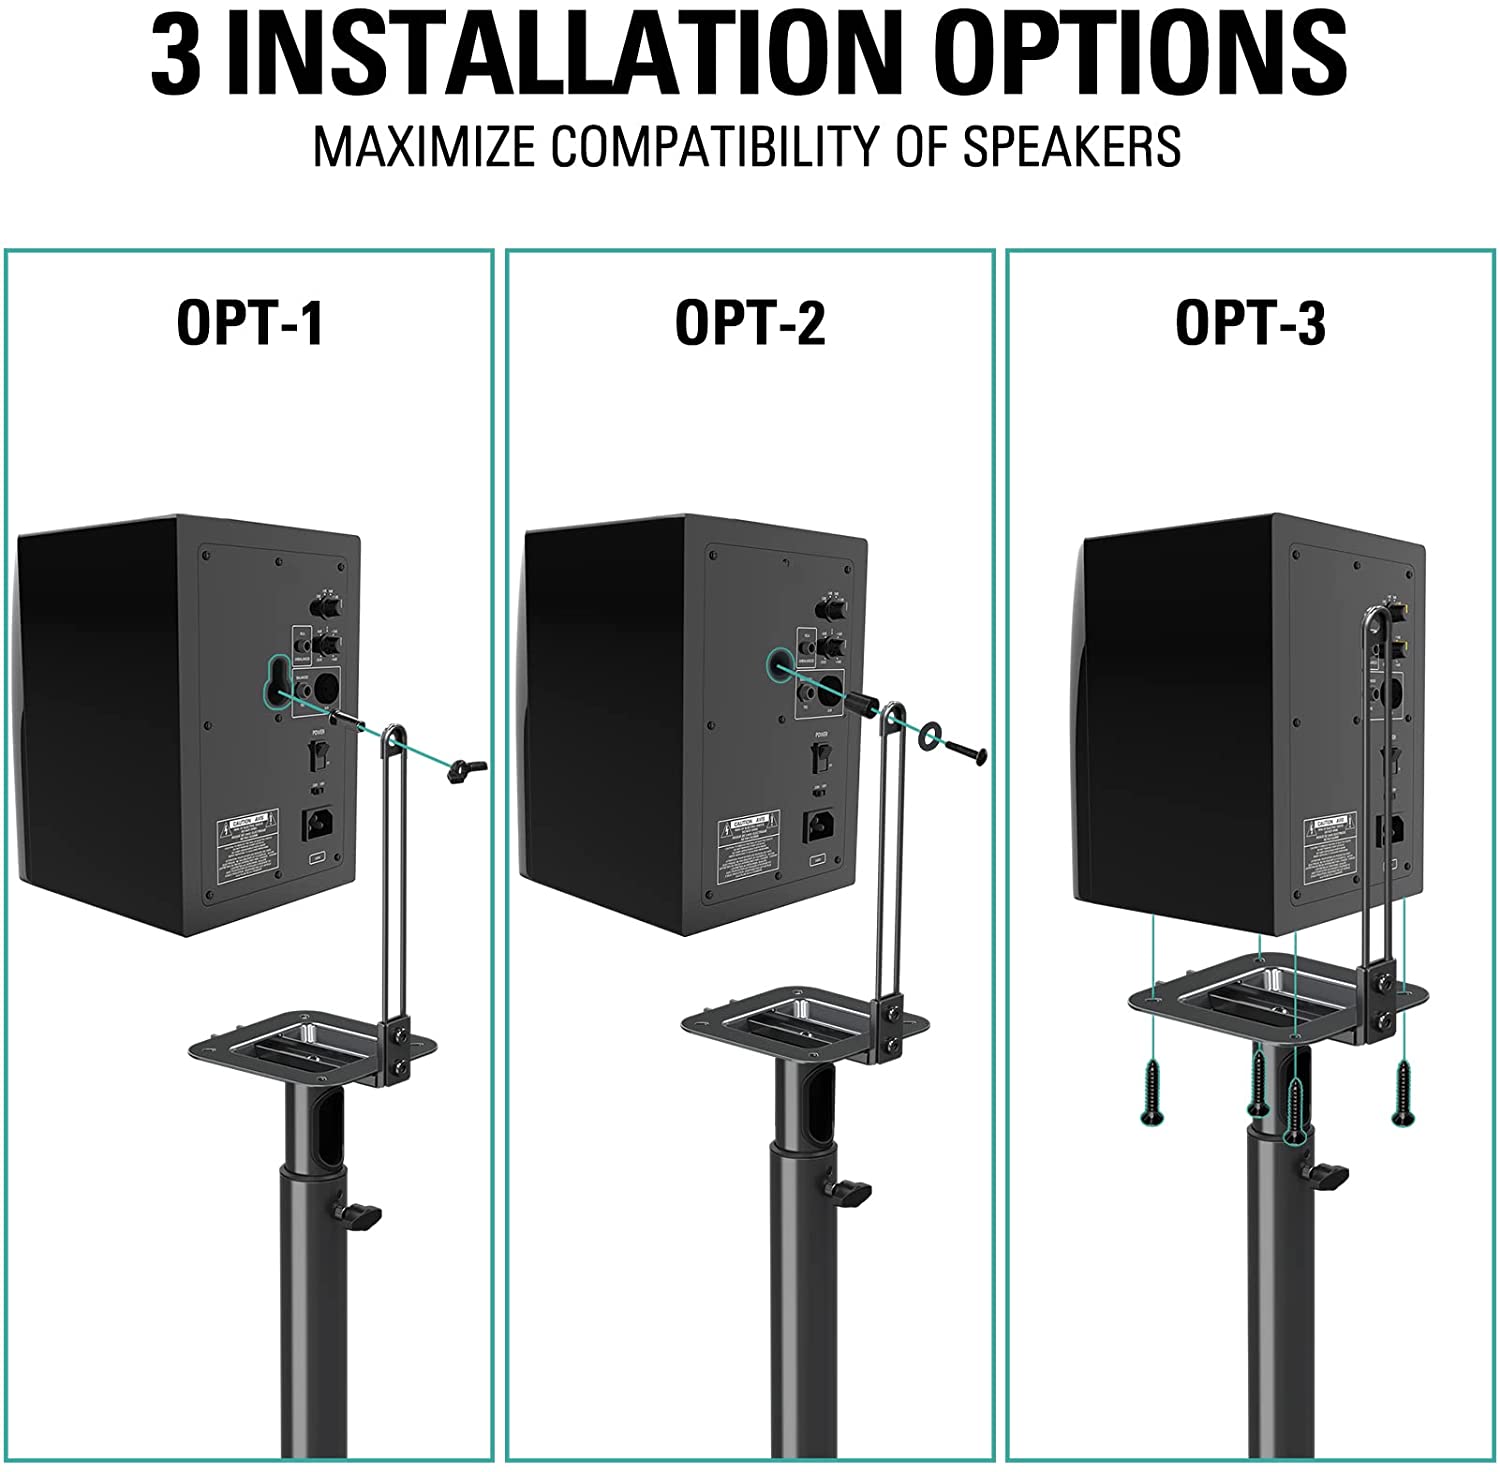 speaker stands offers 3 installation options